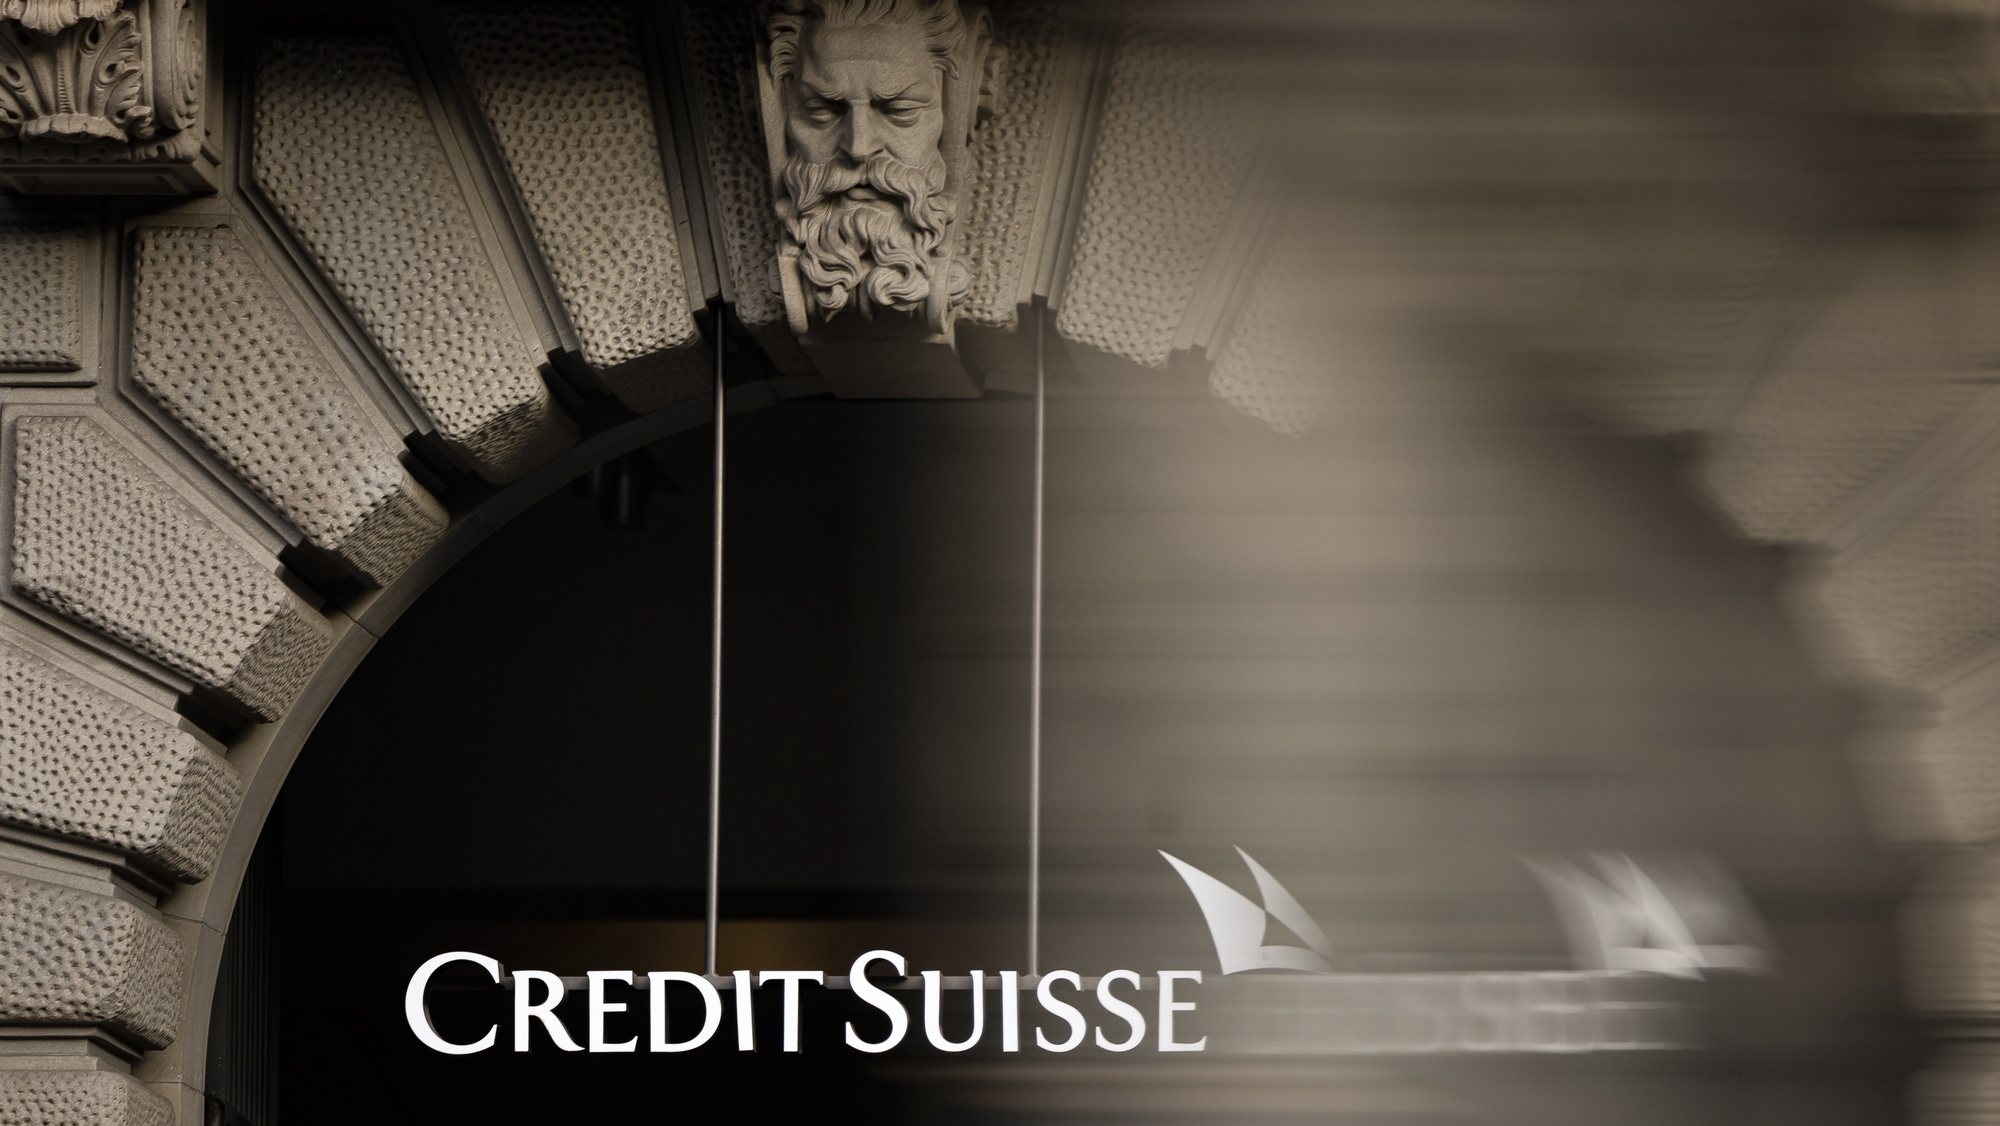 epa10525616 (FILE) - The logo of Swiss bank Credit Suisse is seen at their headquarters in Zurich, Switzerland 27 October 2022 (reissued 16 March 2023). Credit Suisse is borrowing up to 50 billion francs (50.8 billion euros) from the Swiss National Bank (SNB), according to a statement on 16 March 2023. This is intended to strengthen the group, whose shares have crashed on the stock exchange.  EPA/MICHAEL BUHOLZER